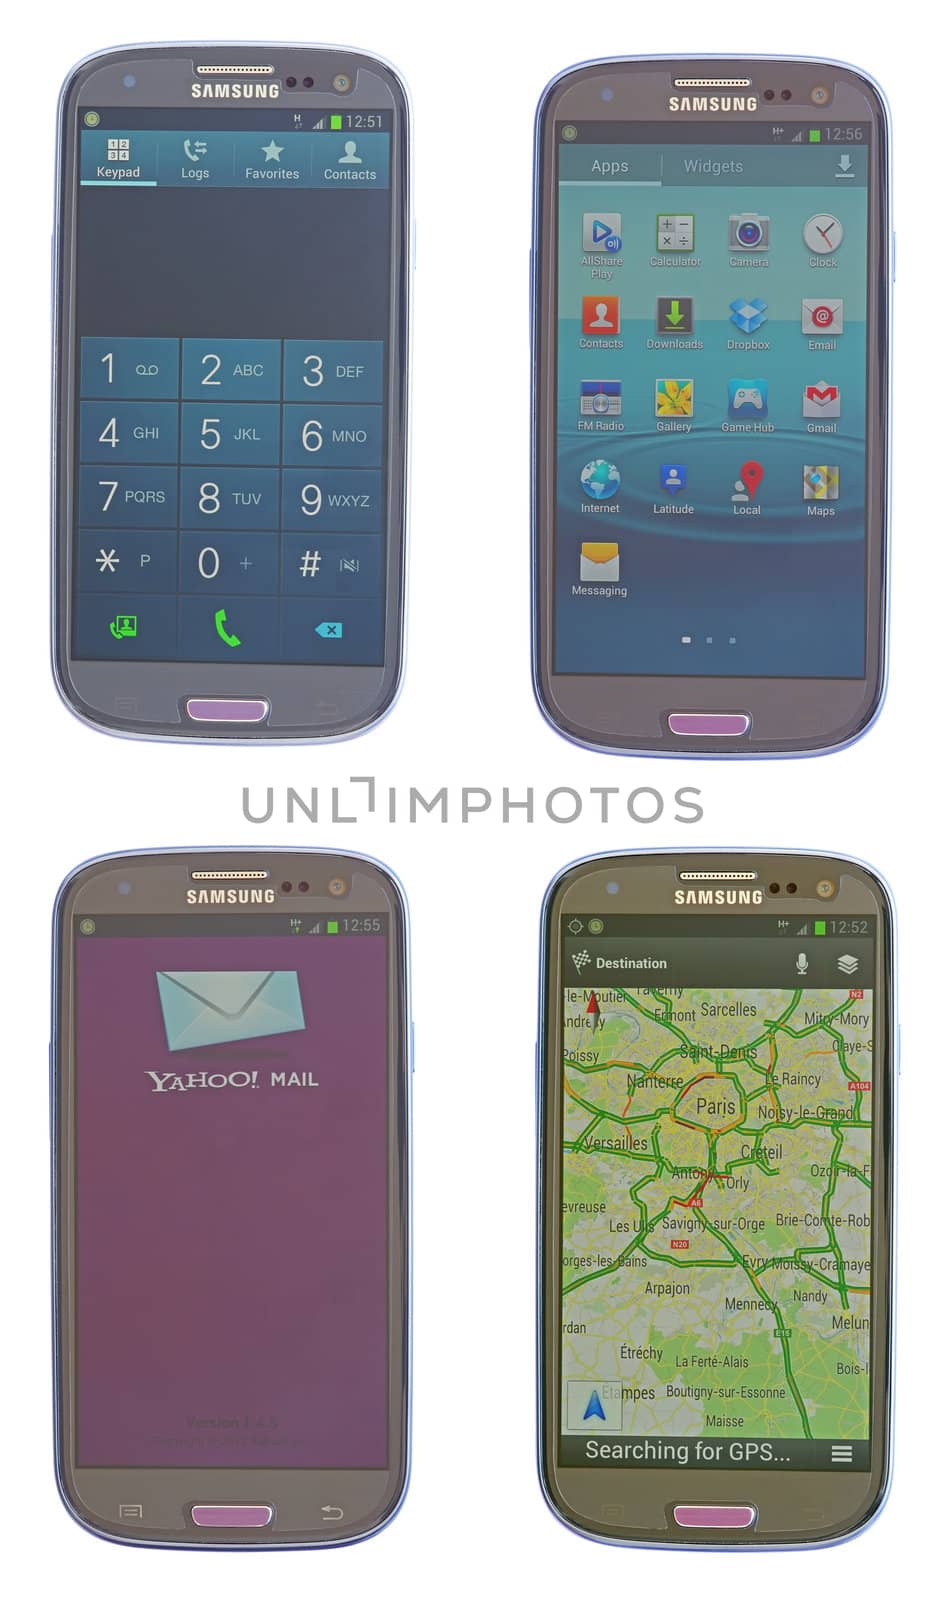 Touch screen phone menu, Samusng Galaxy SIII with Android